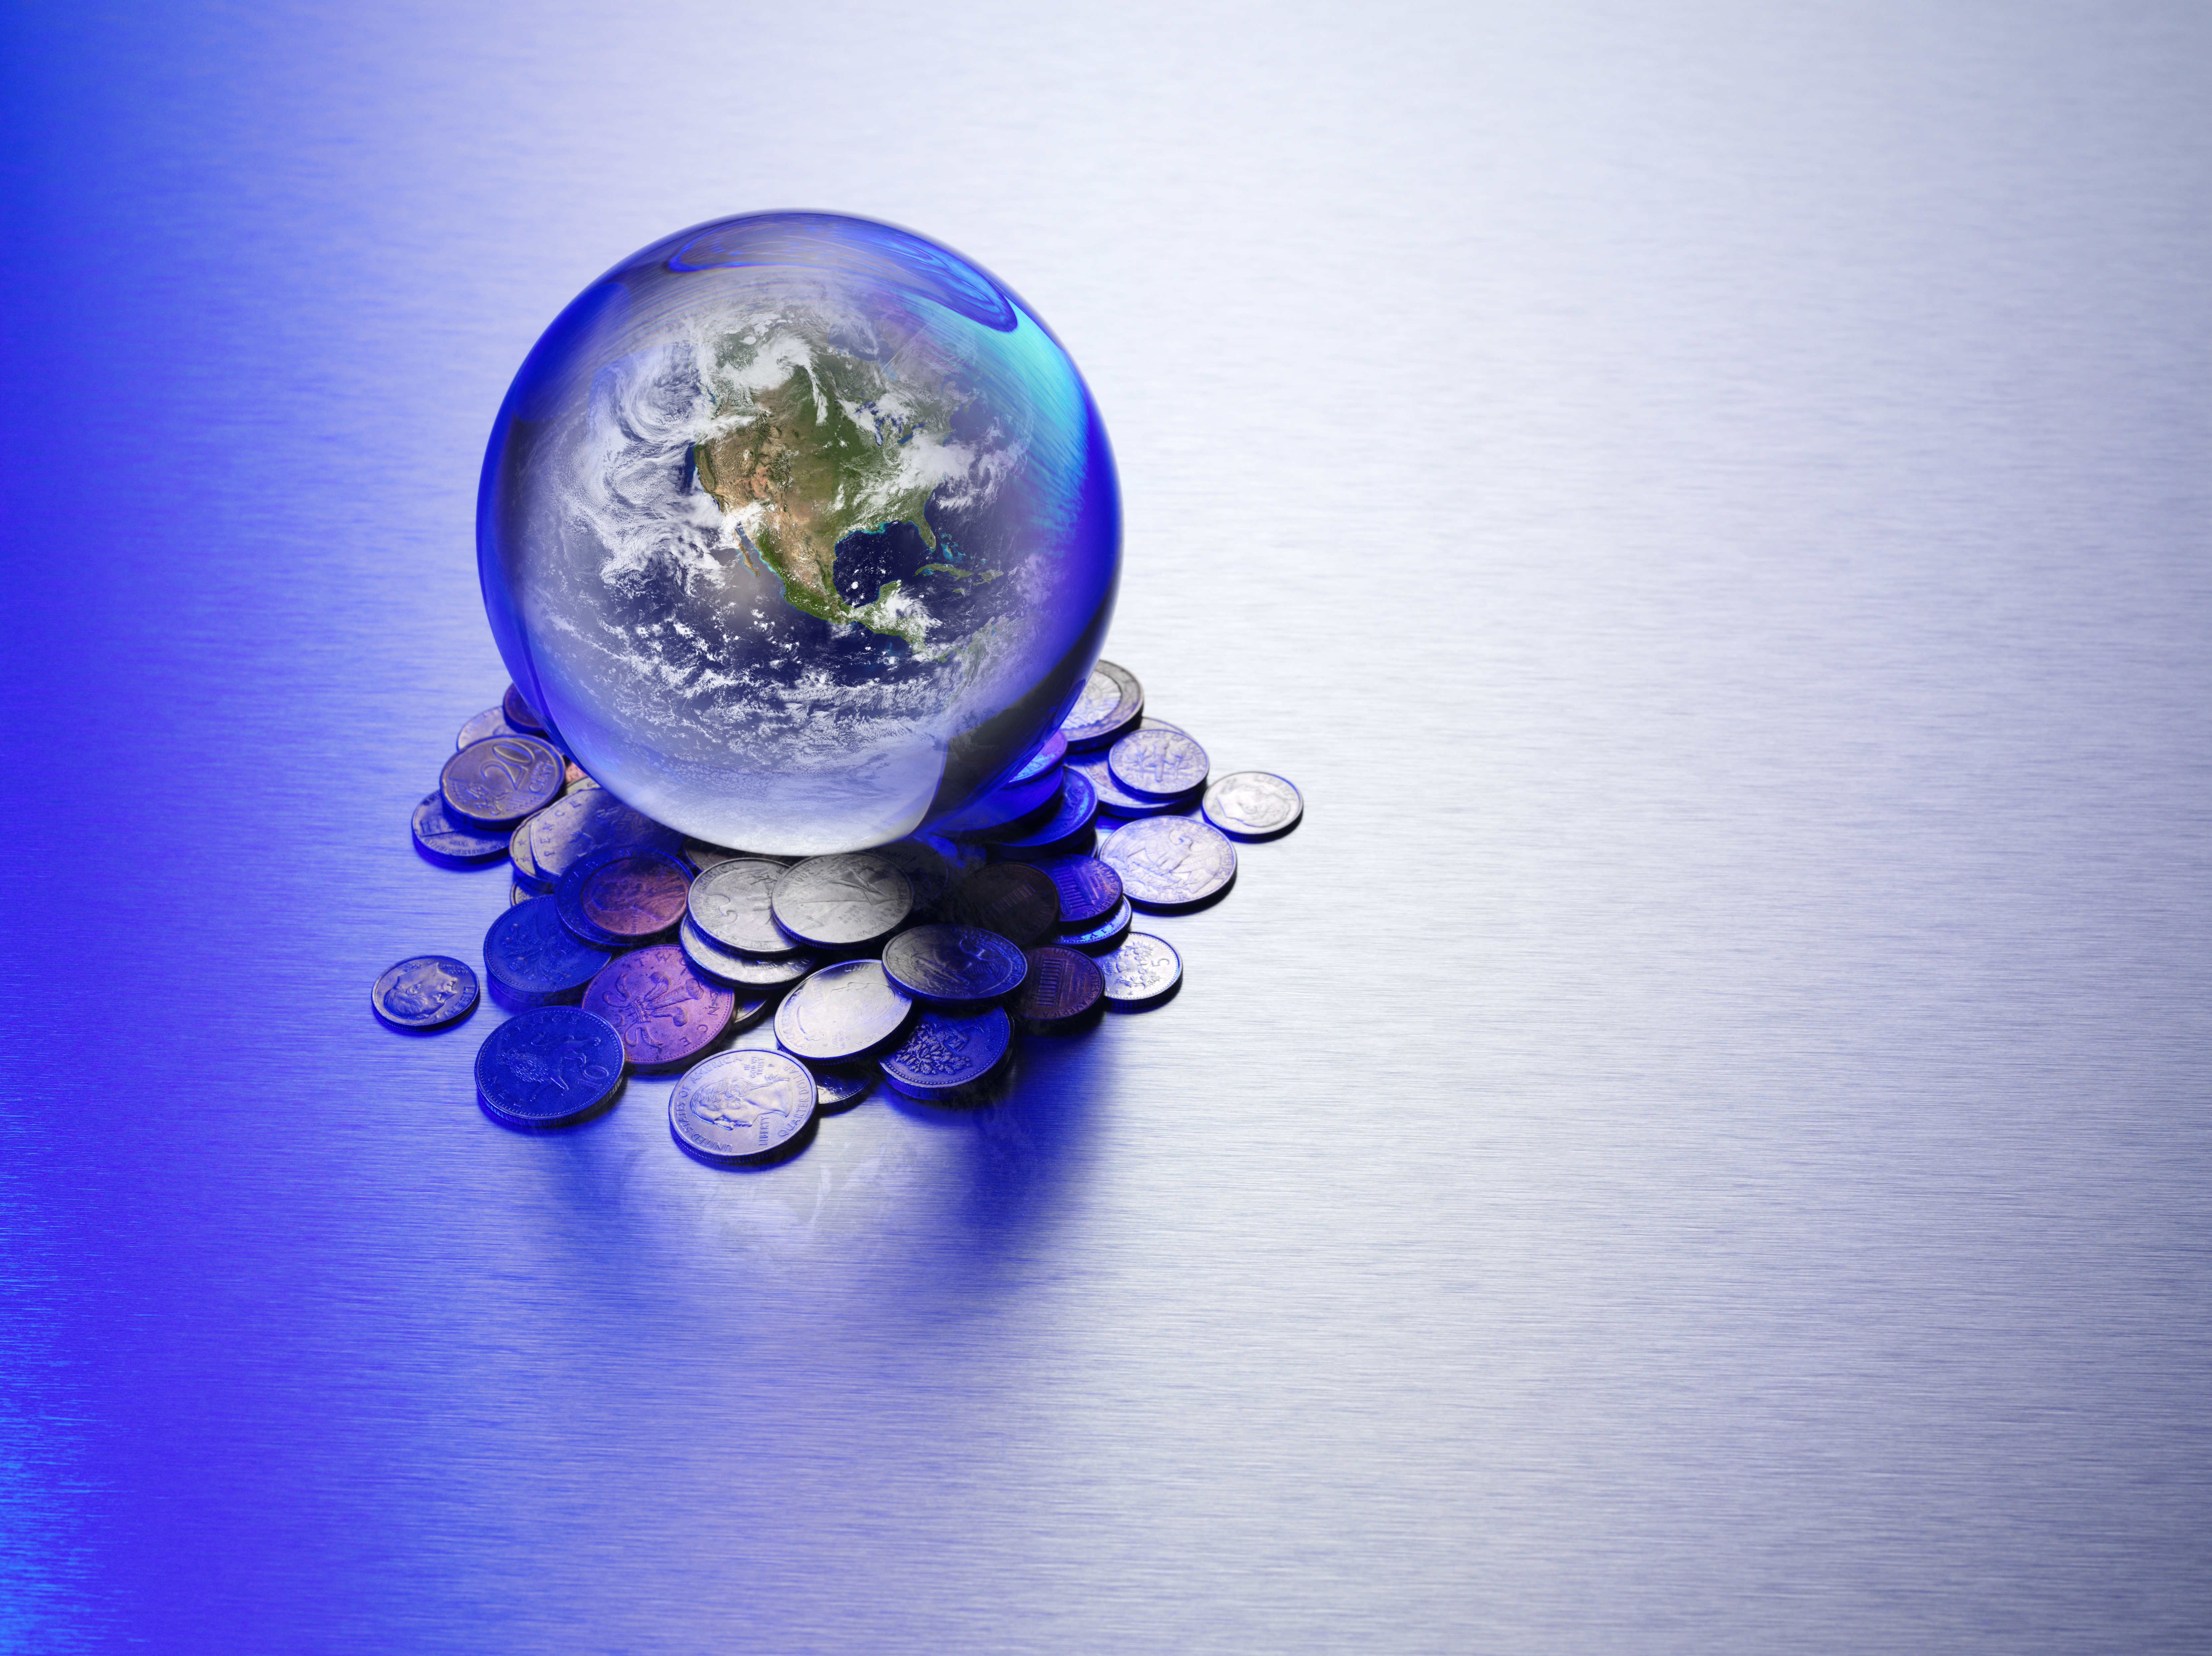 Image of a world map inside a crystal ball atop a pile of coins to represent predictions in venture capital for the year ahead.